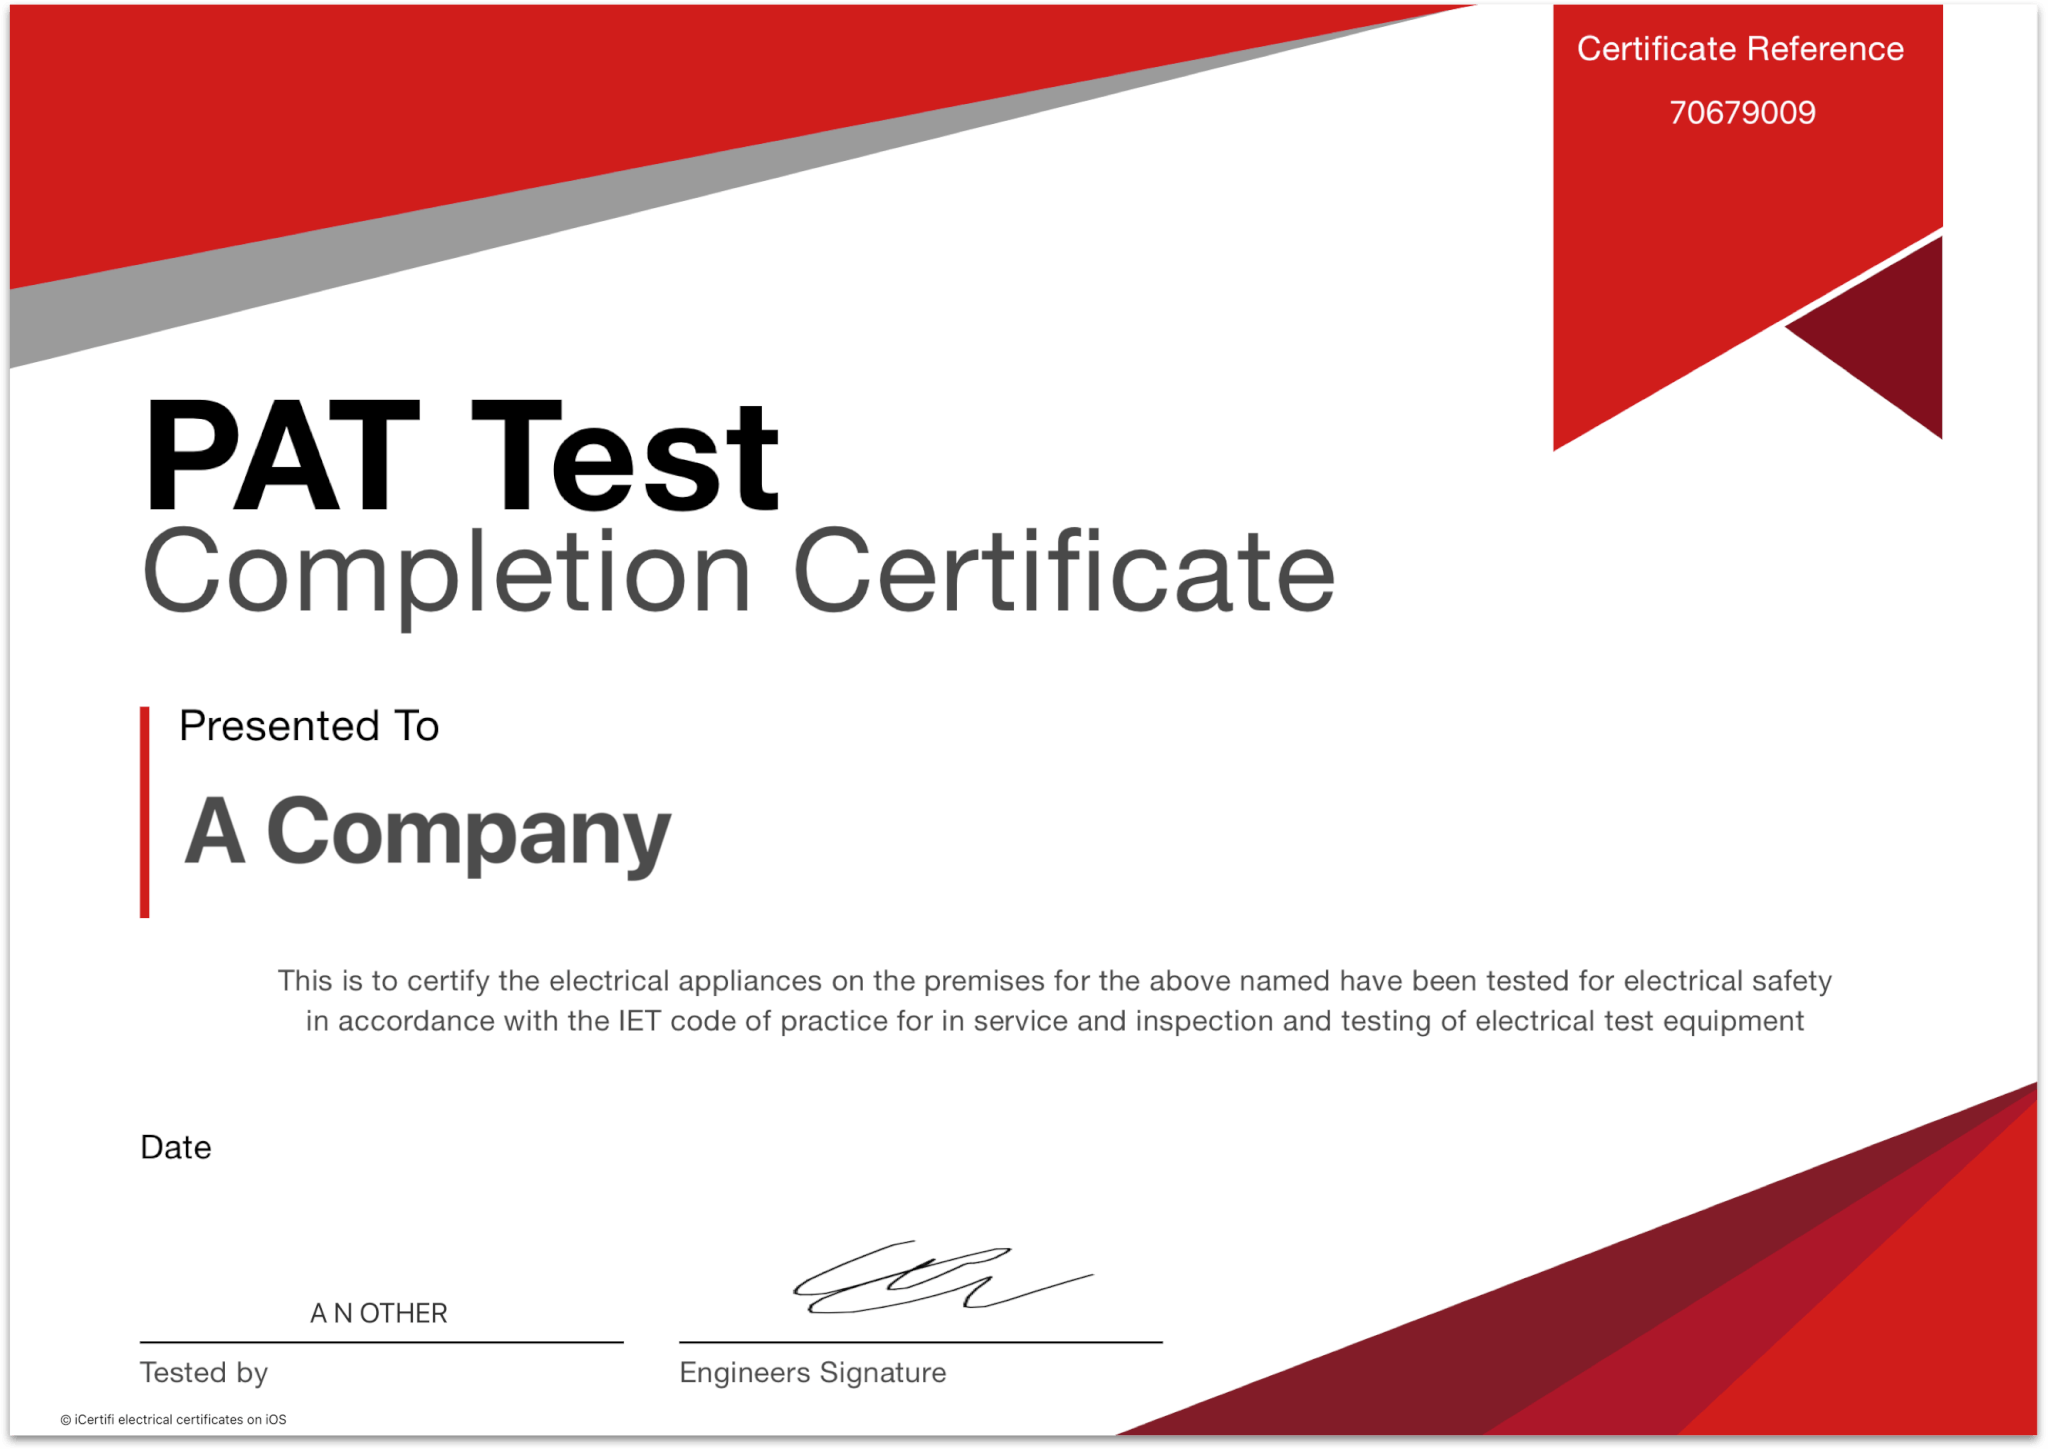 PAT Test Completion Certificate